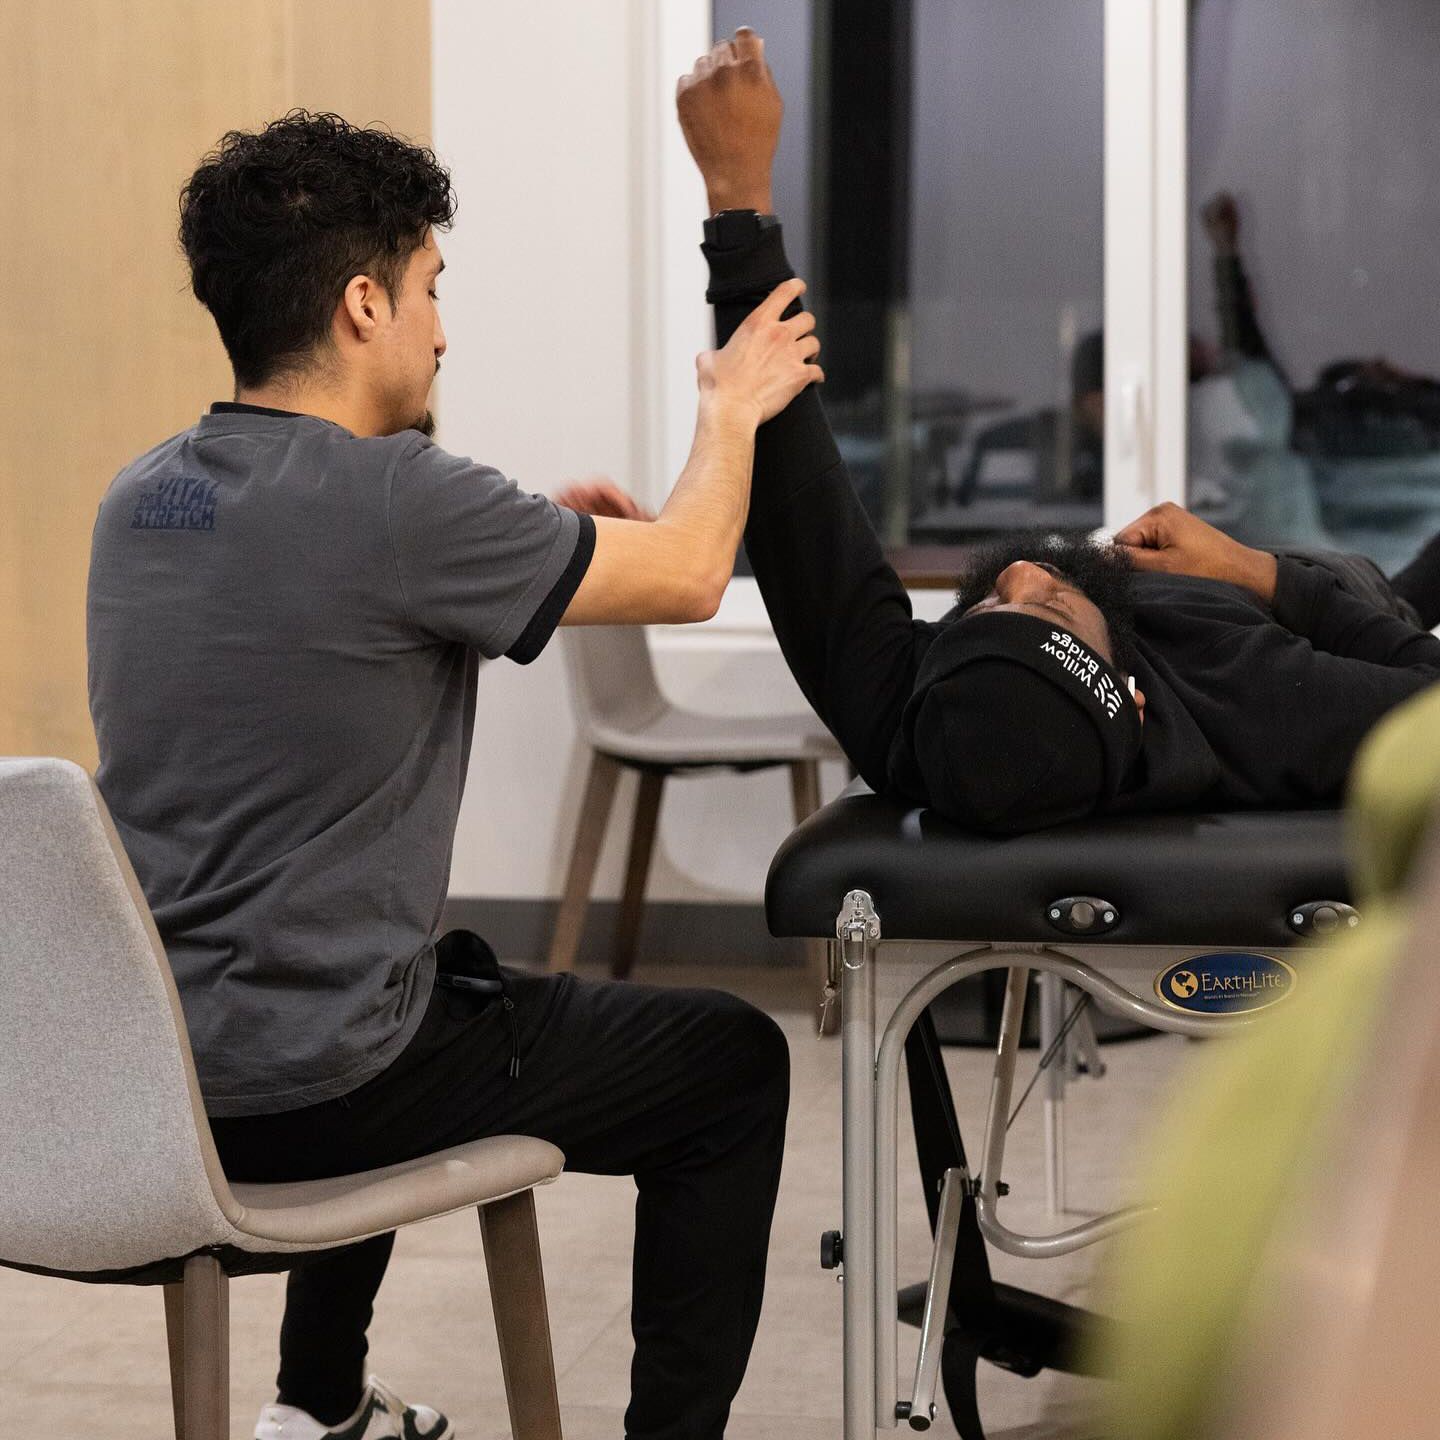 A man is sitting in a chair helping another man stretch his arm